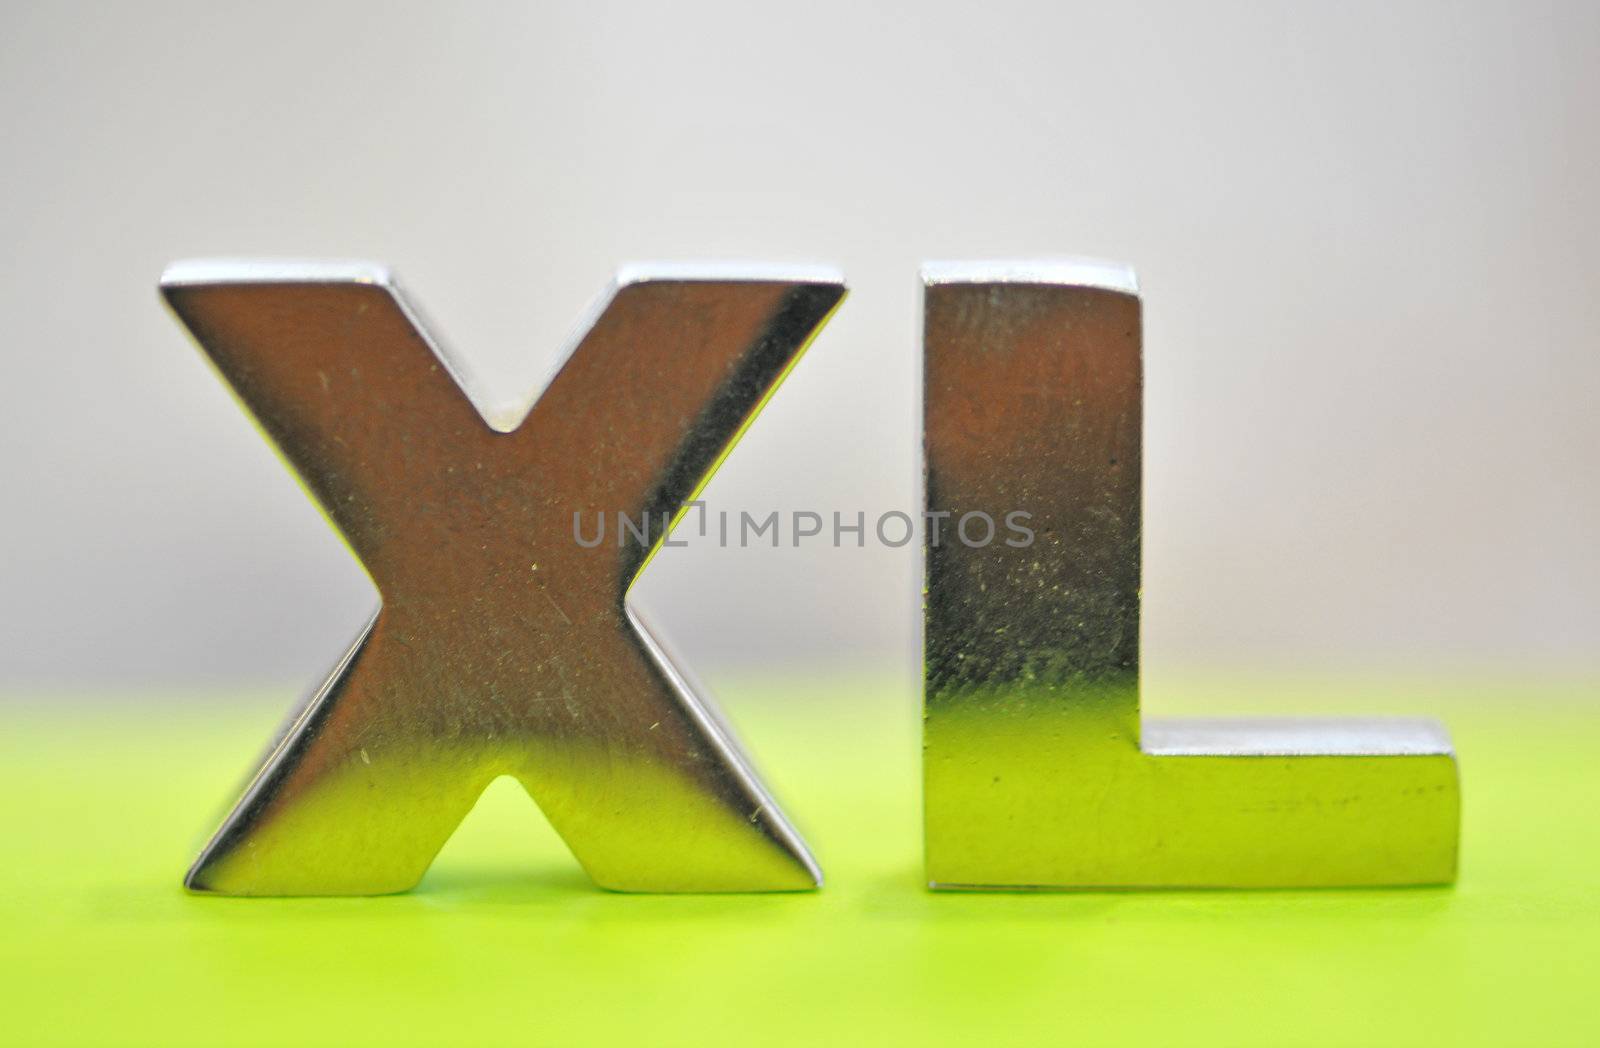 xl sign, colored labels on the artistic shot